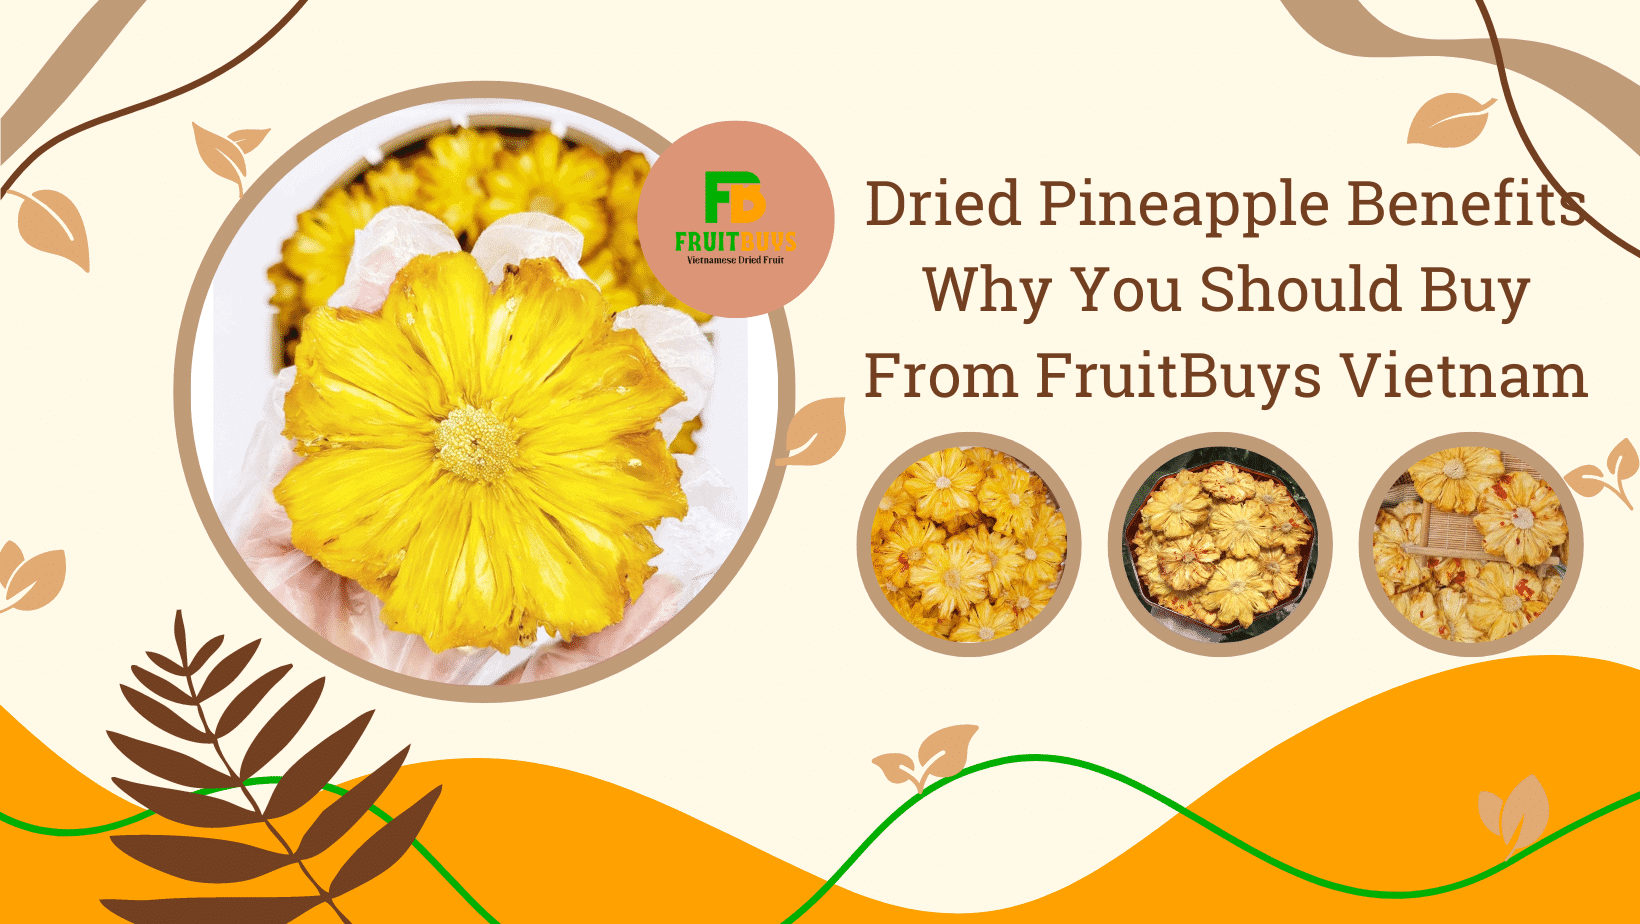 FruitBuys Vietnam Dried Pineapple Benefits Why You Should Buy From FruitBuys Vietnam